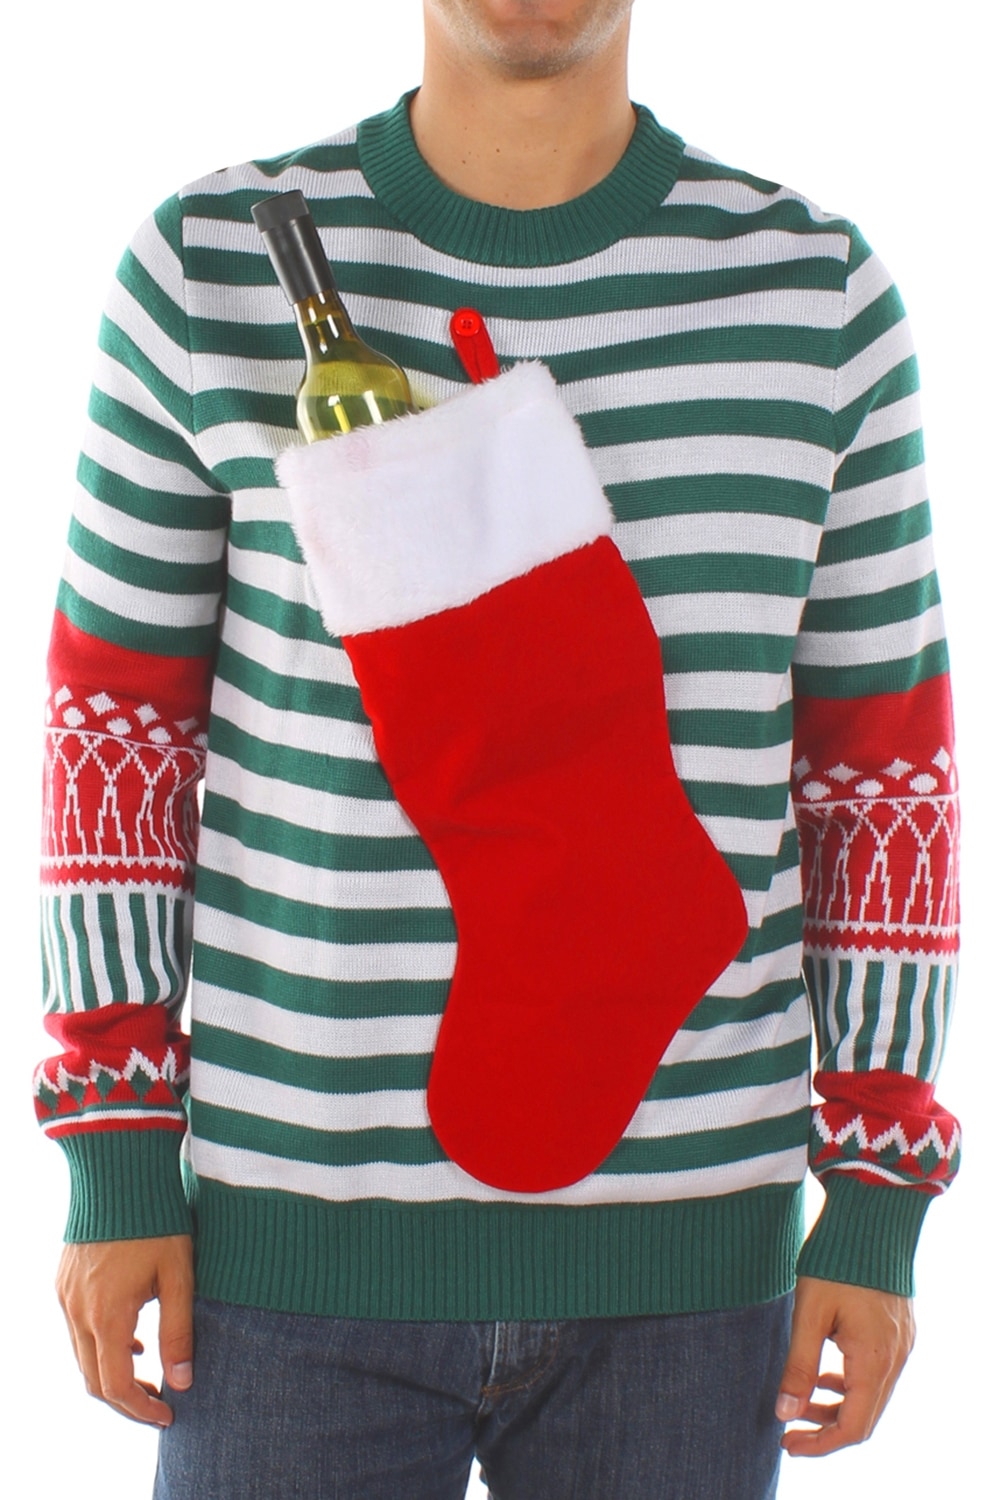 Best Ugly Christmas Sweaters 2017: Unisex Stocking with Wine